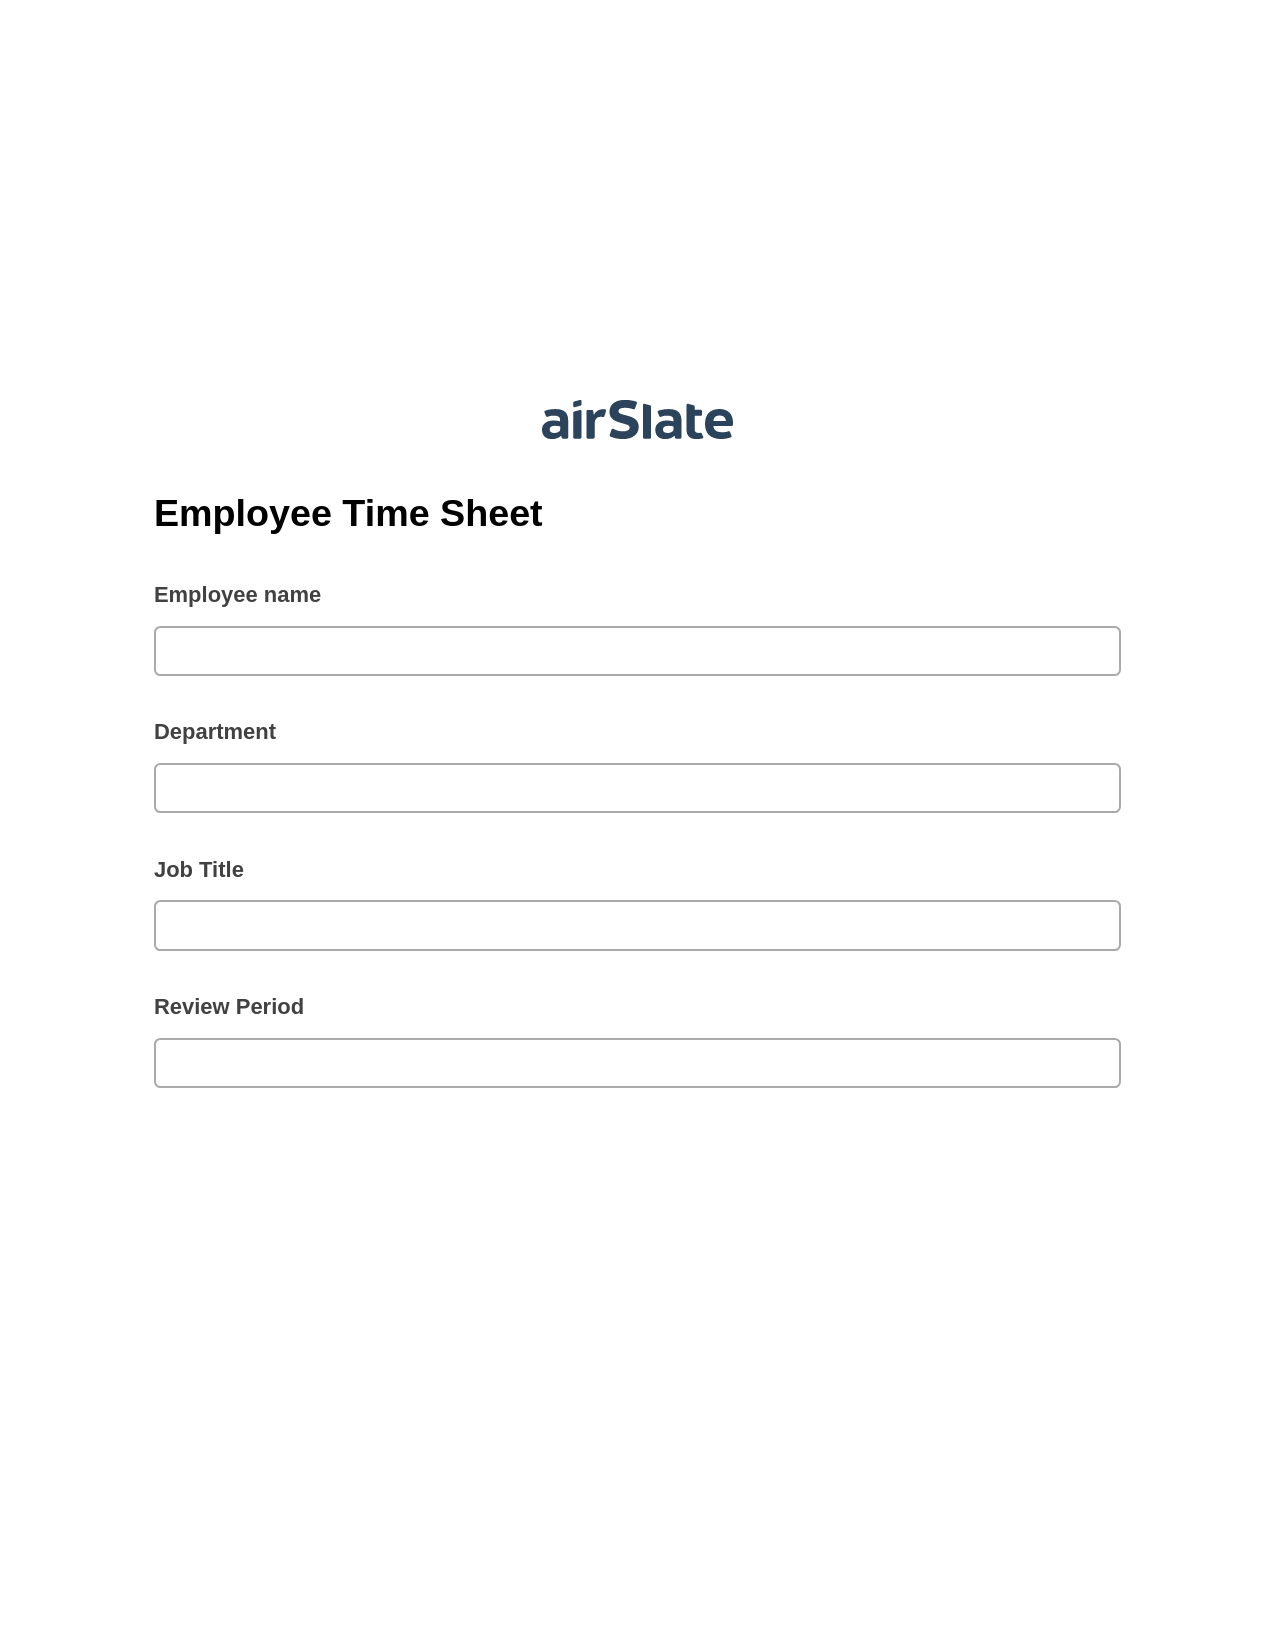 Multirole Employee Time Sheet Pre-fill from Salesforce Records Bot, Remove Slate Bot, Archive to Dropbox Bot